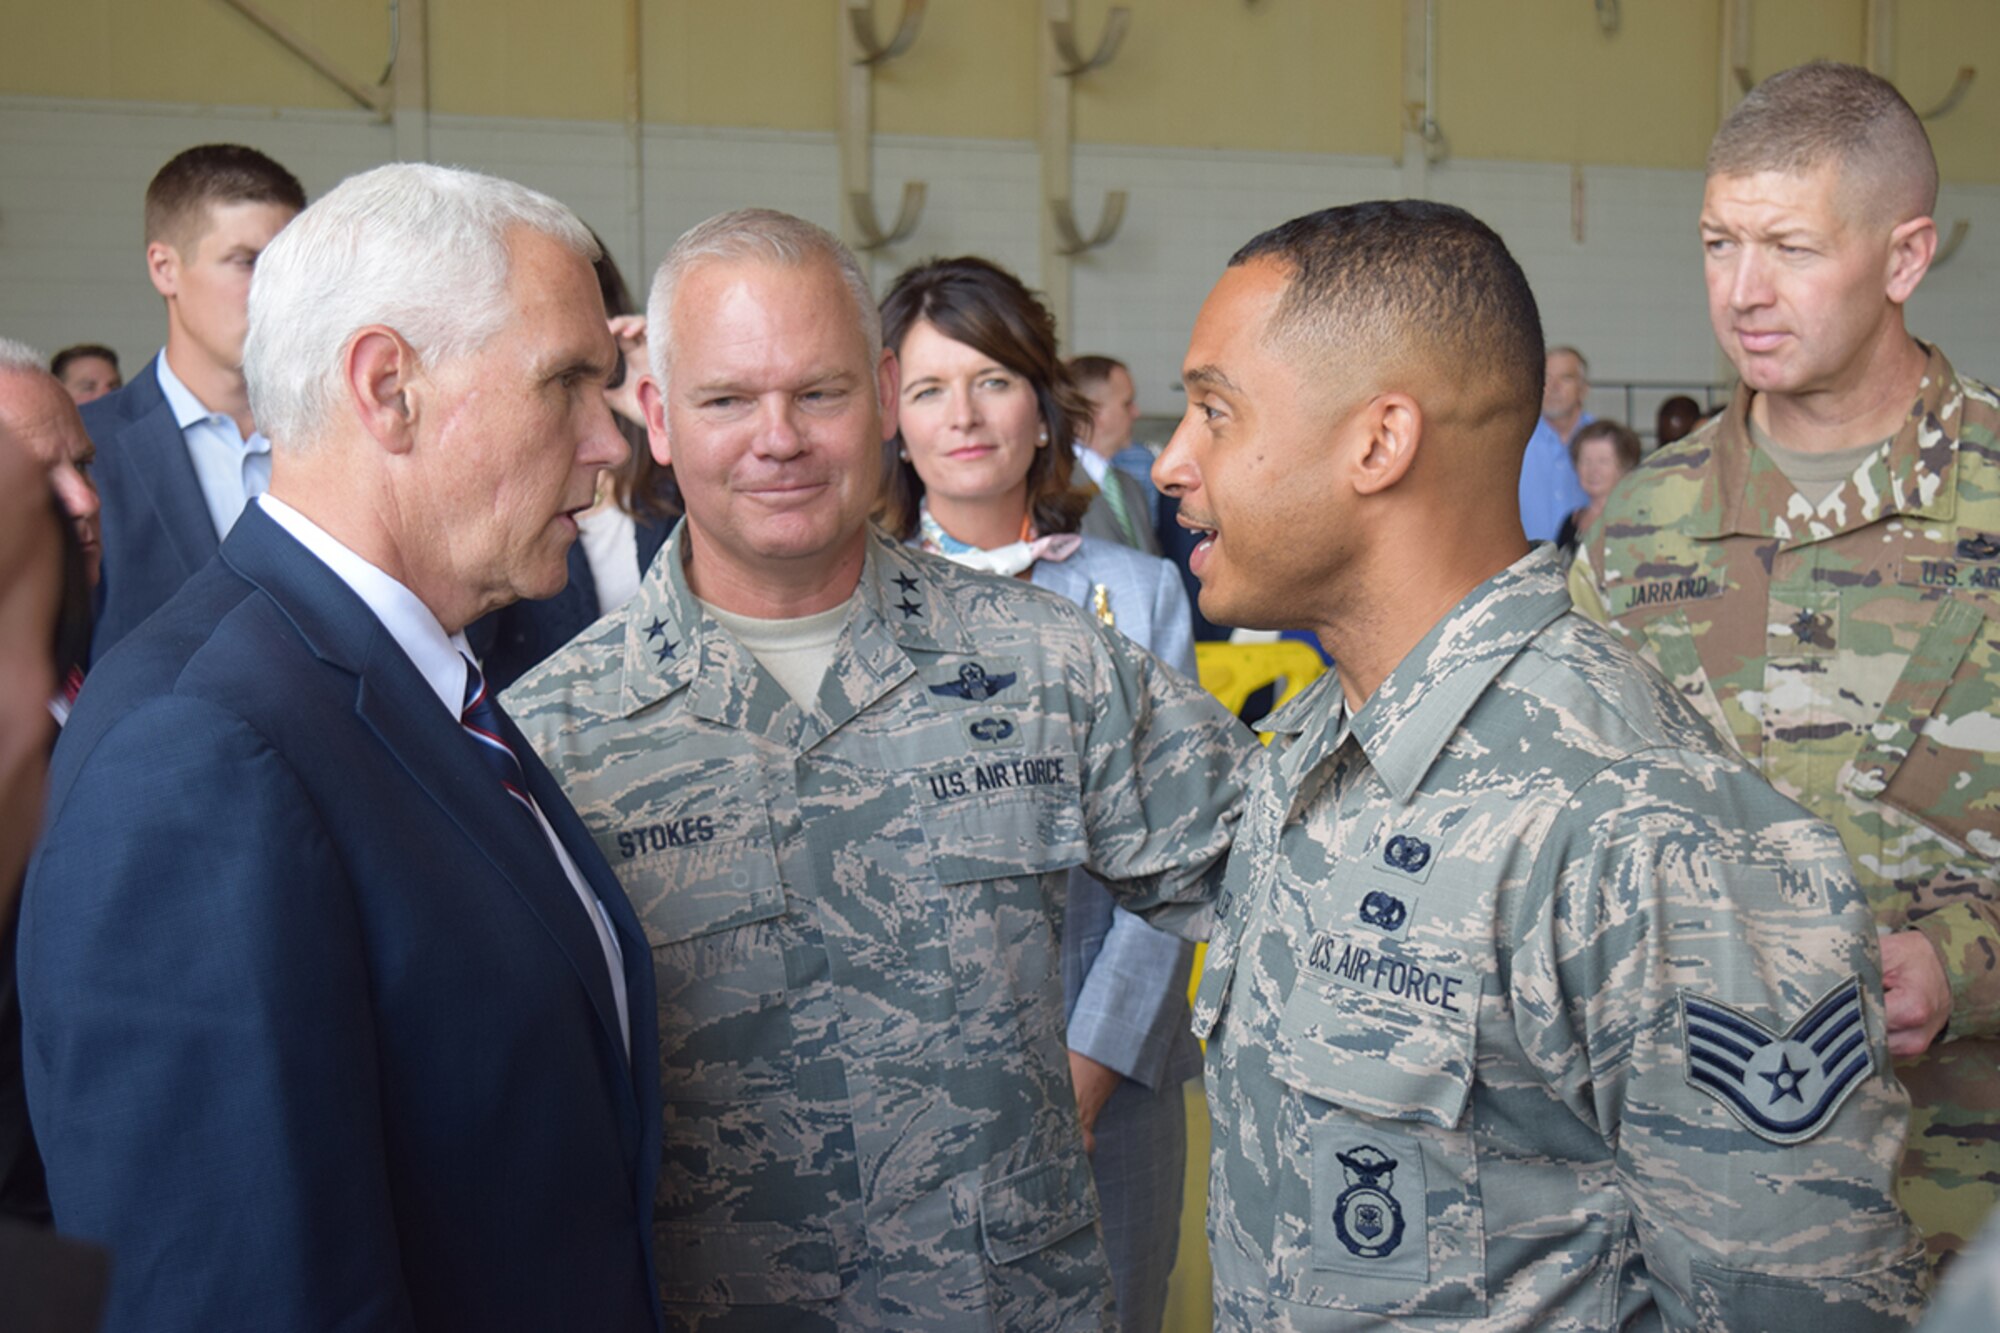 Vice President Mike Pence meets with Staff Sgt. Isaac Caleb of the 94th Security Forces Squadron, after speaking to service members, civilians and families at Dobbins Air Reserve Base, Georgia June 9, 2017. Caleb recently returned from Afghanistan, where he served on a Fly Away Security Team. (Georgia National Guard photo/CPT William Carraway)